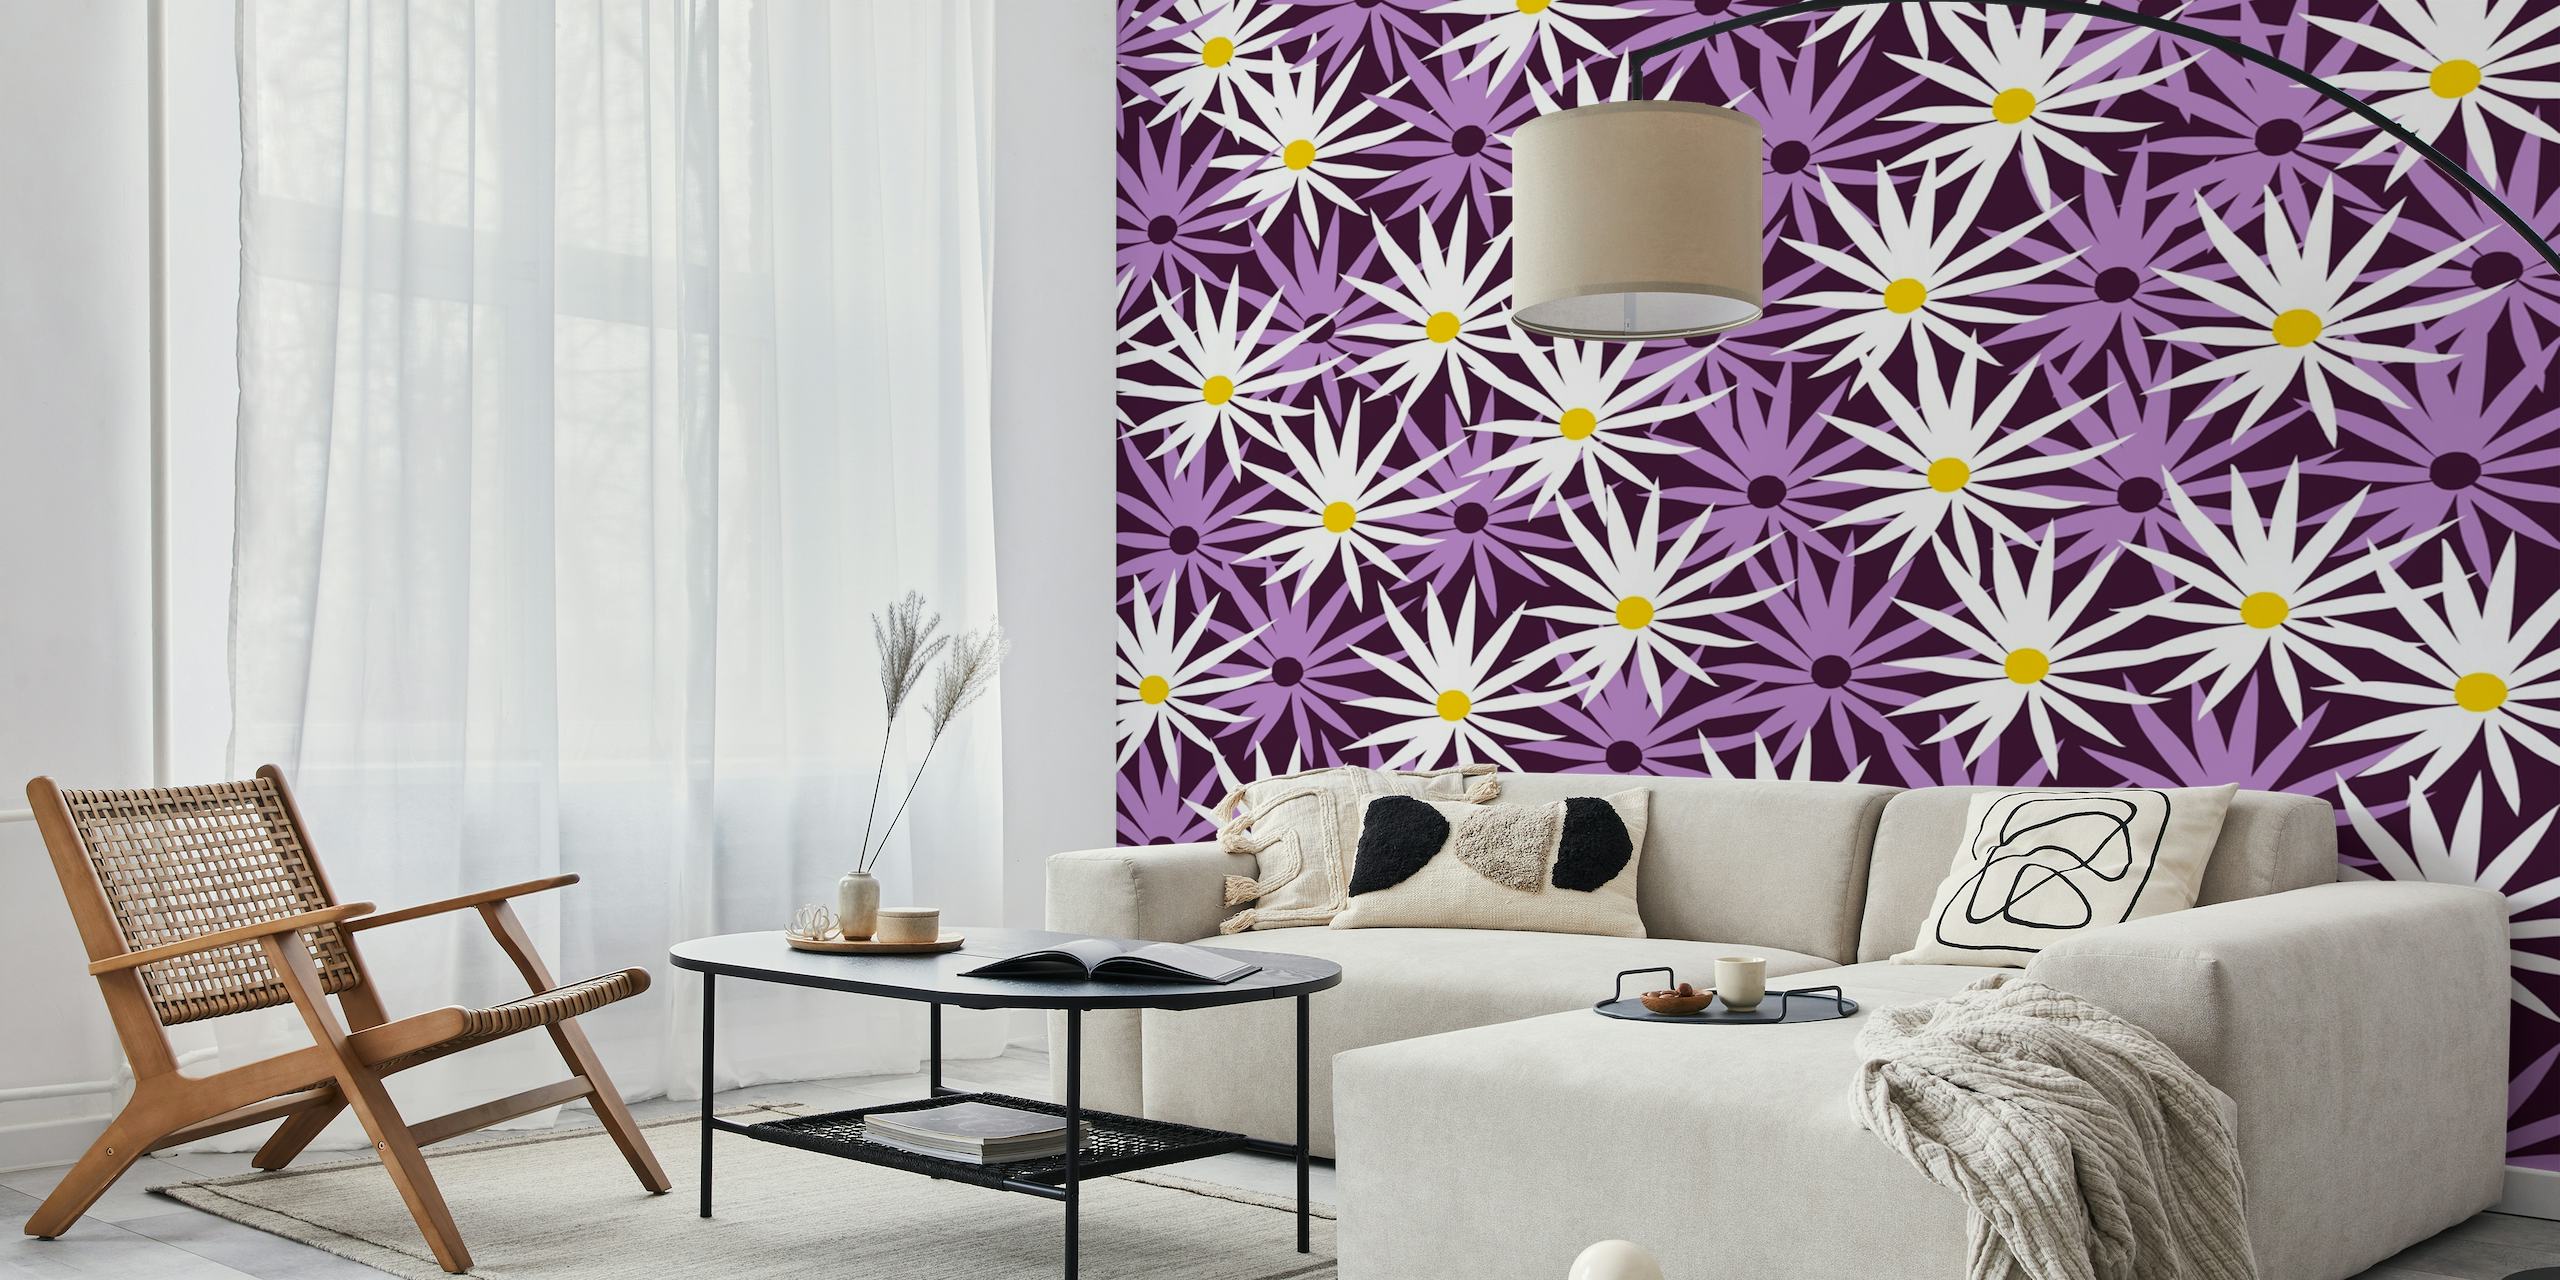 Purple and white floral wall mural design named 'Yasmine is Shine'